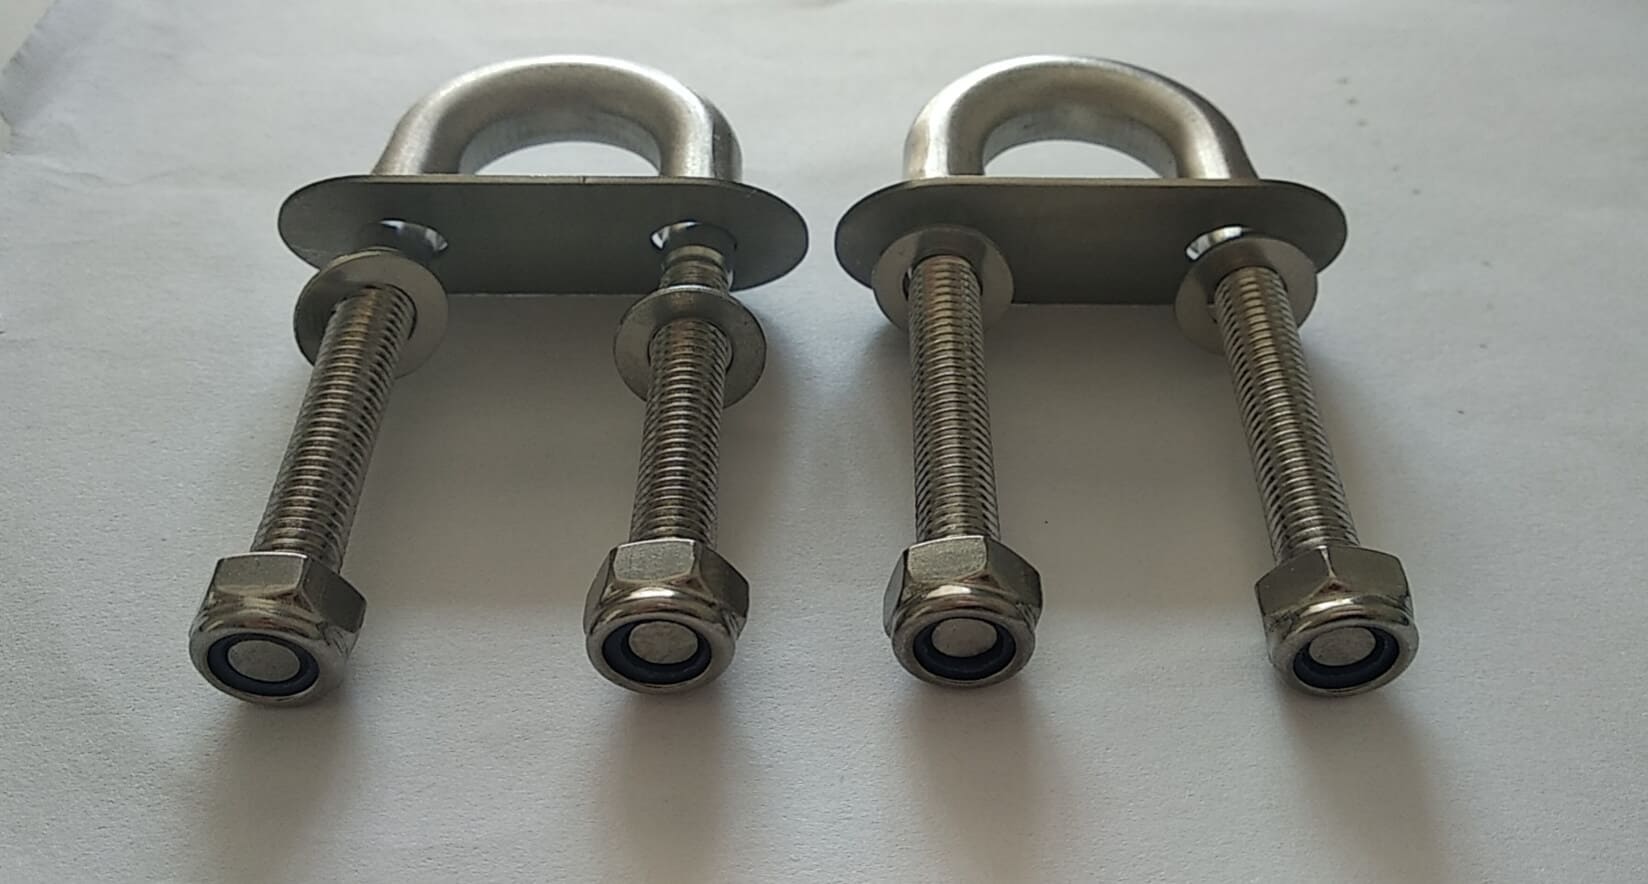 Stainless Steel M10 Lead Bolts for top-roping climbing wall design and building_RMC